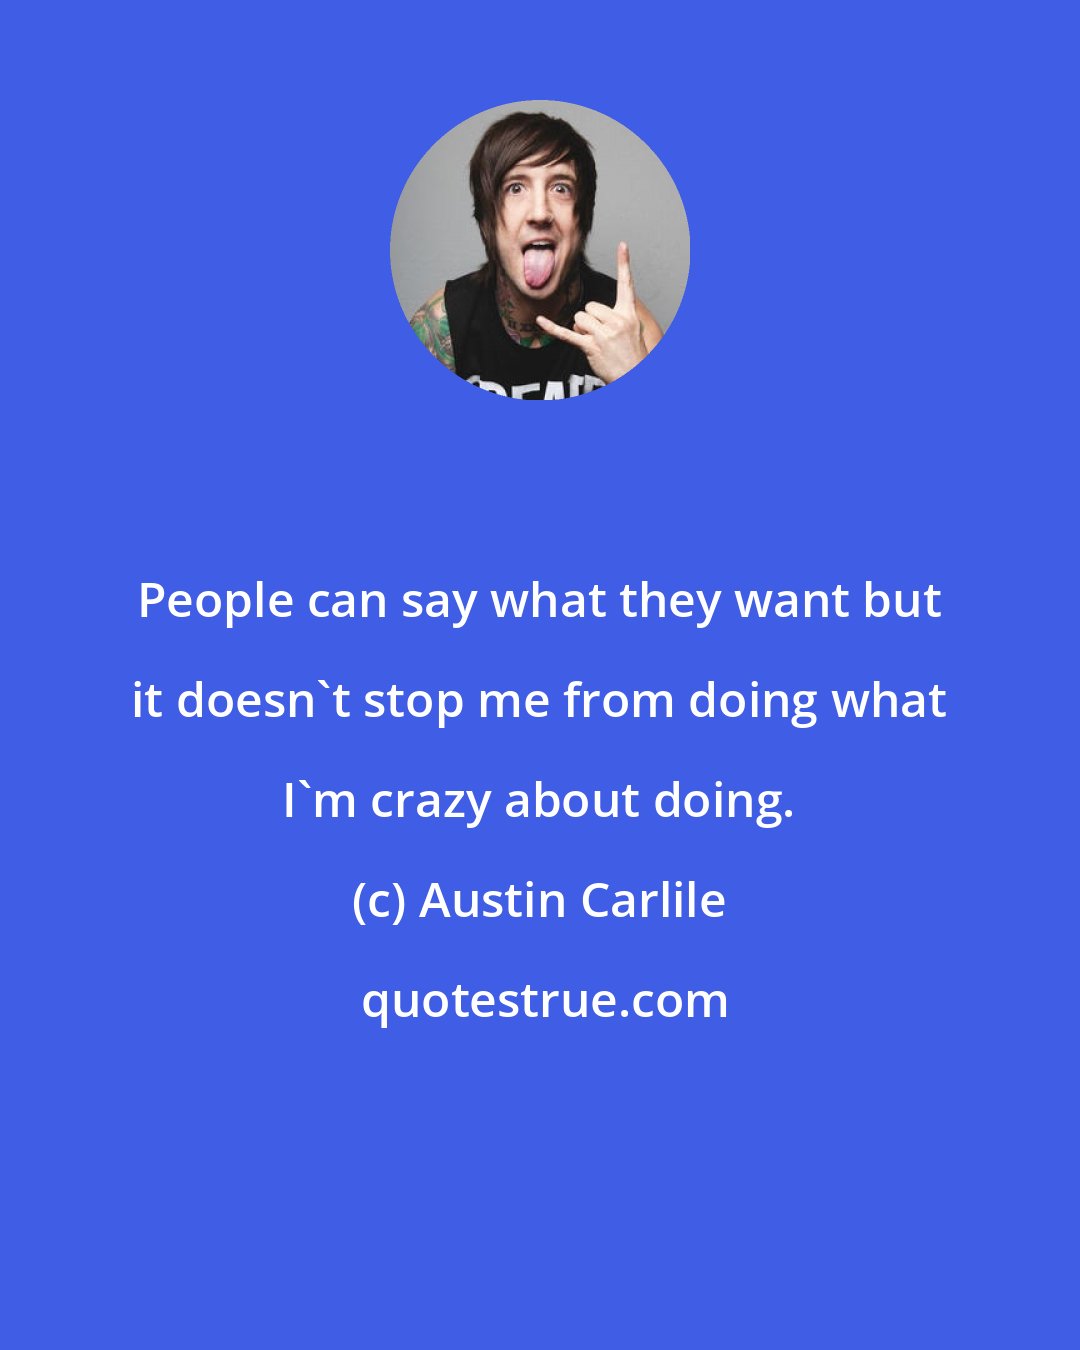 Austin Carlile: People can say what they want but it doesn't stop me from doing what I'm crazy about doing.